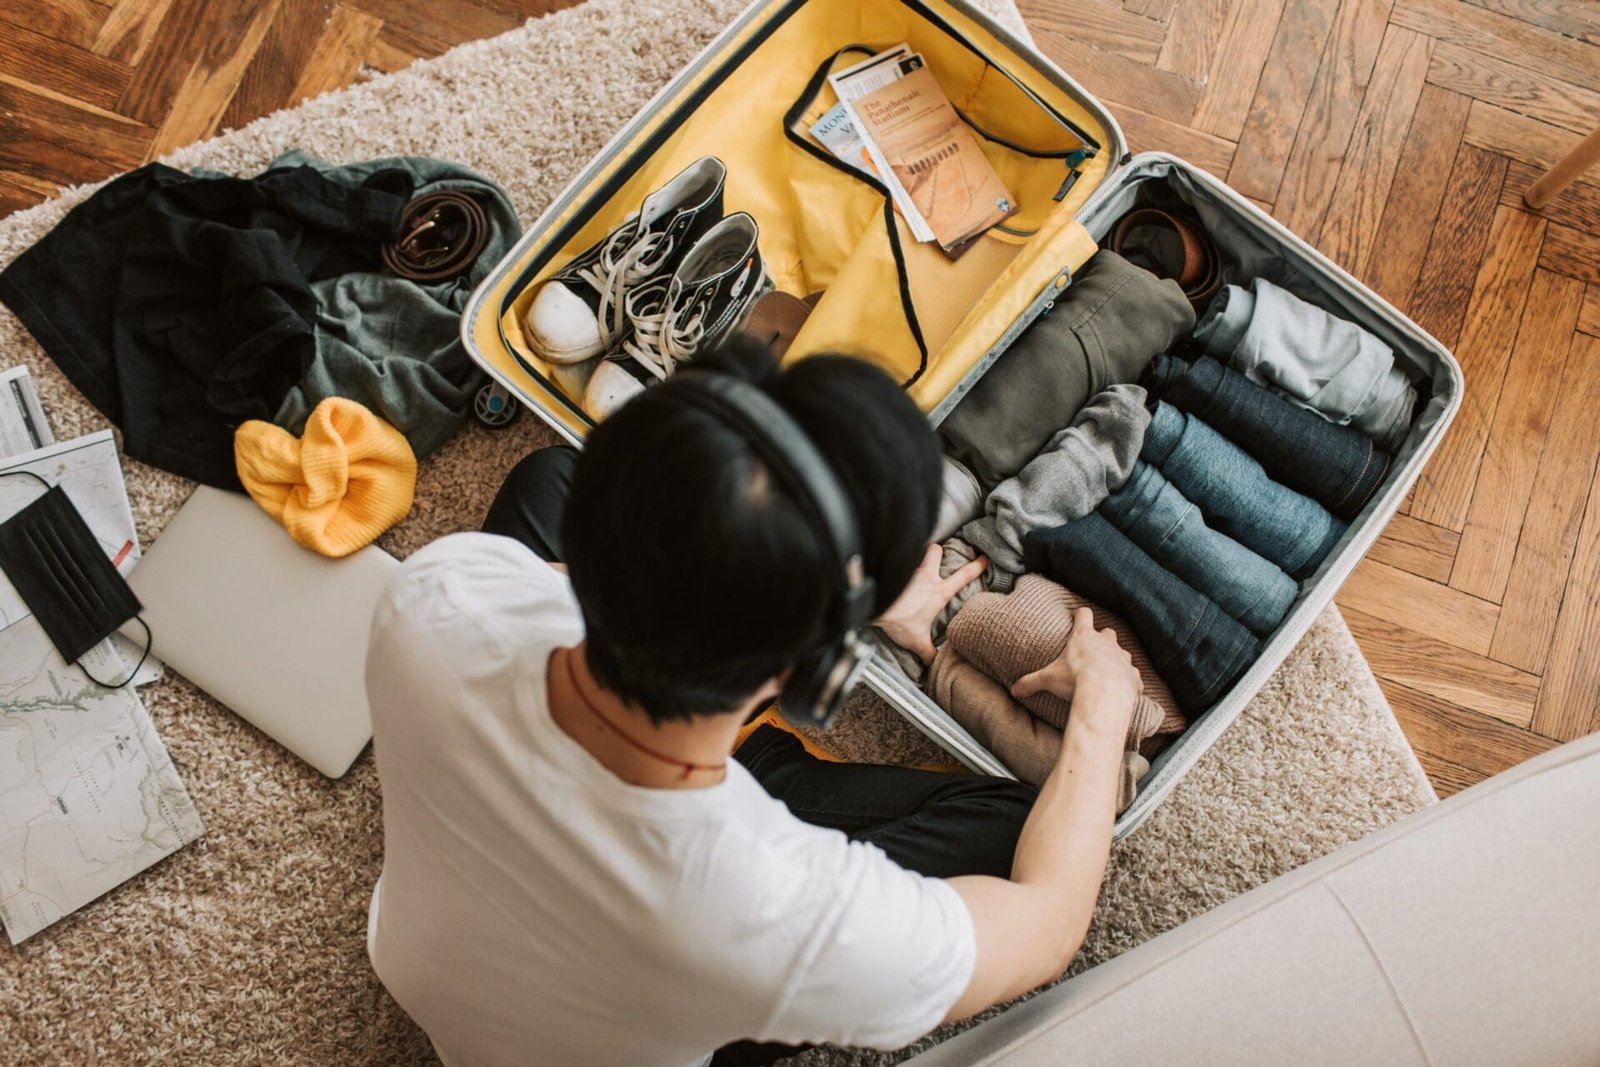 How to Pack for College: 10 Tips For Your Freshman [Photos]